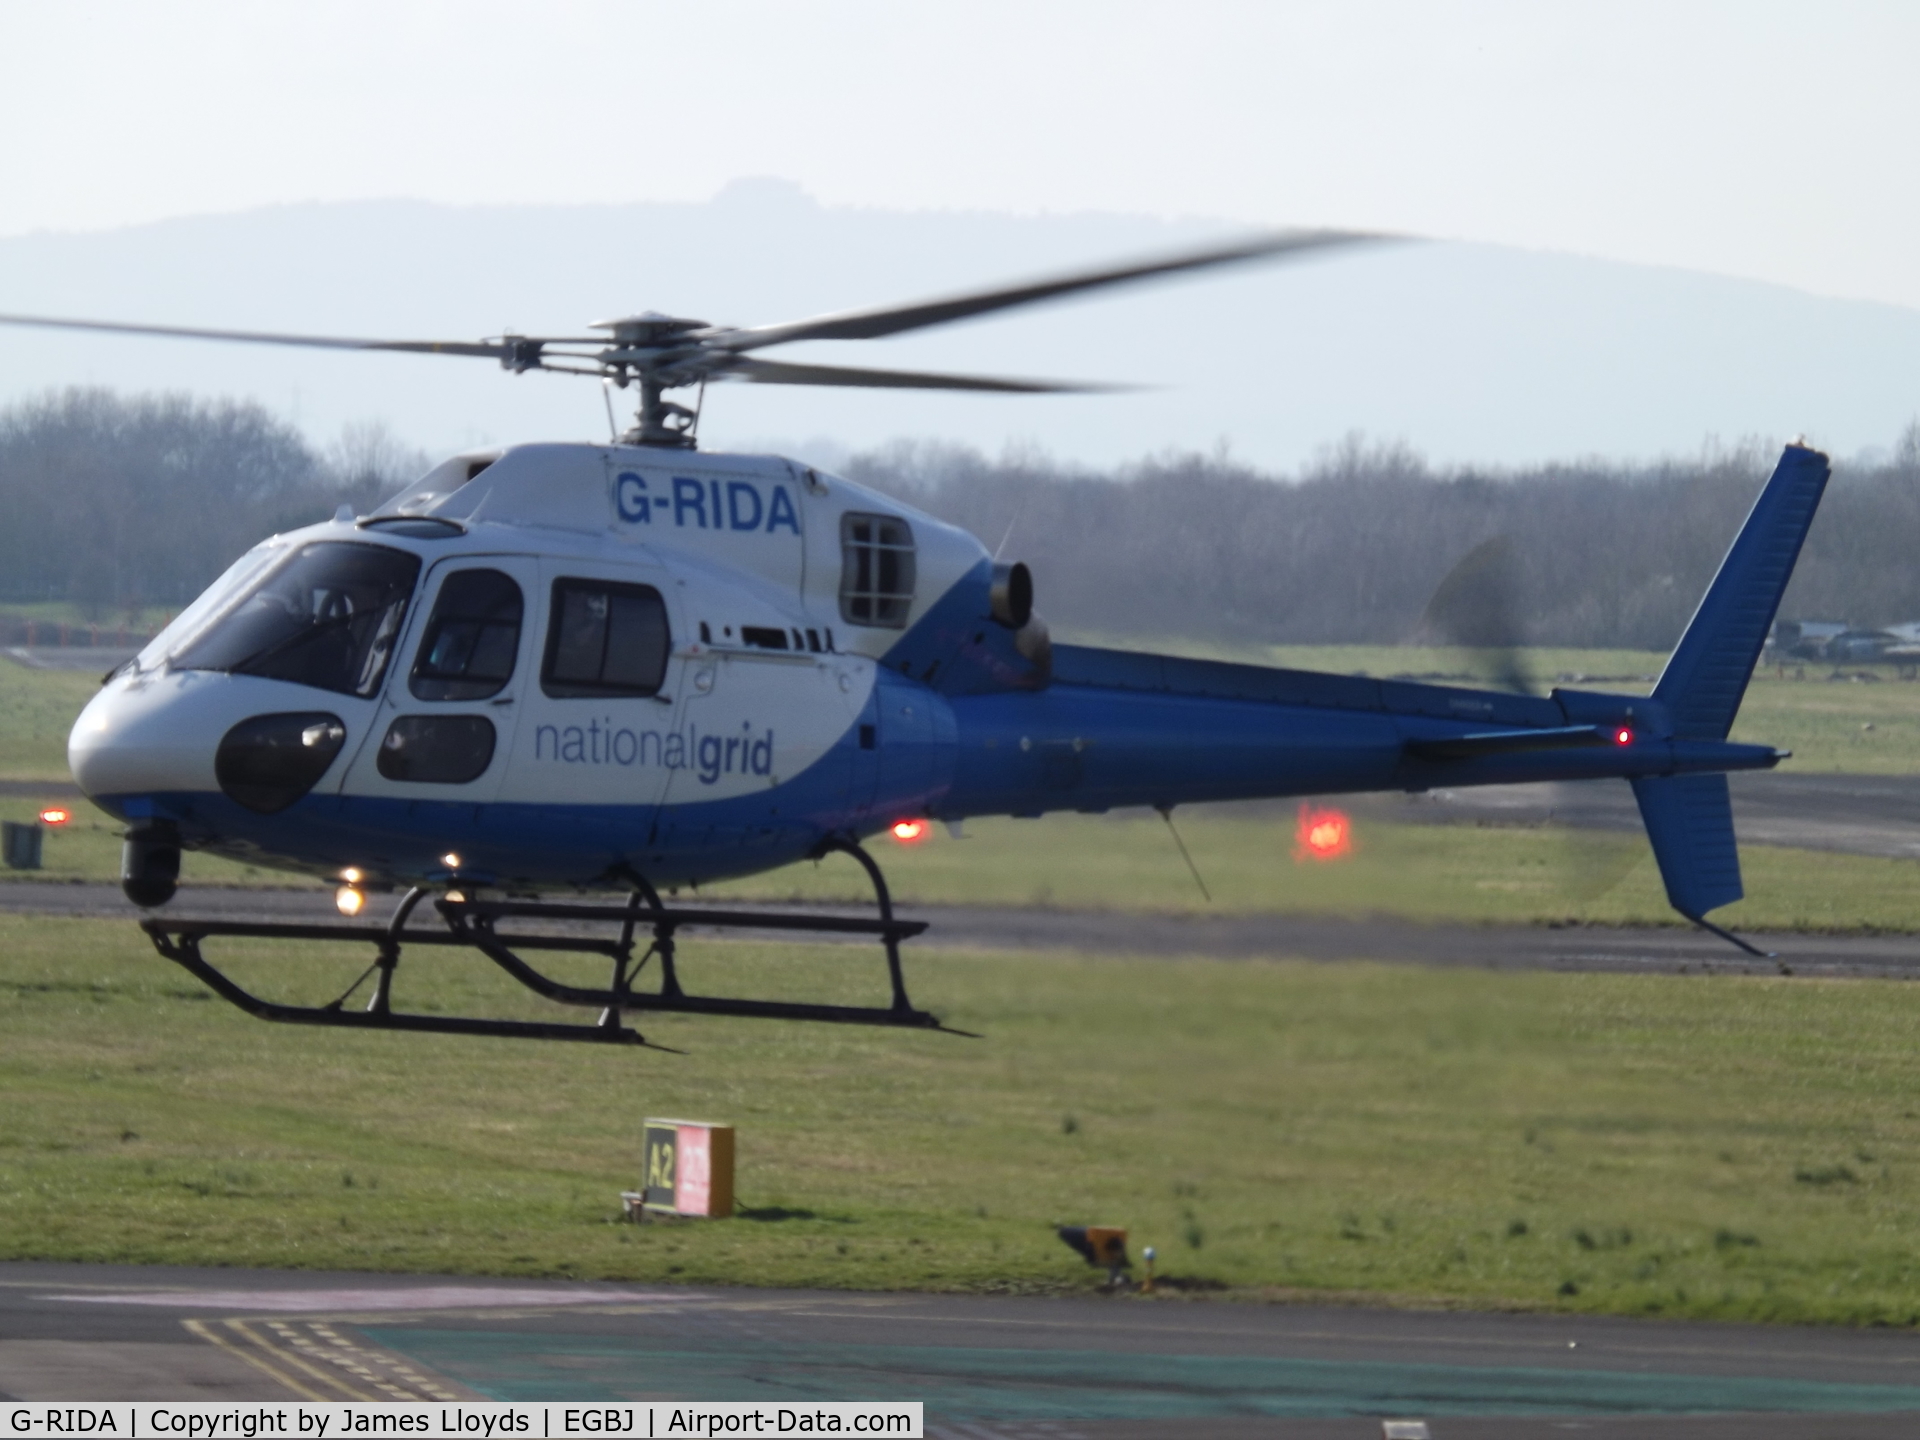 G-RIDA, 2007 Eurocopter AS-355NP Ecureuil 2 C/N 5734, At Gloucestershire Airport.